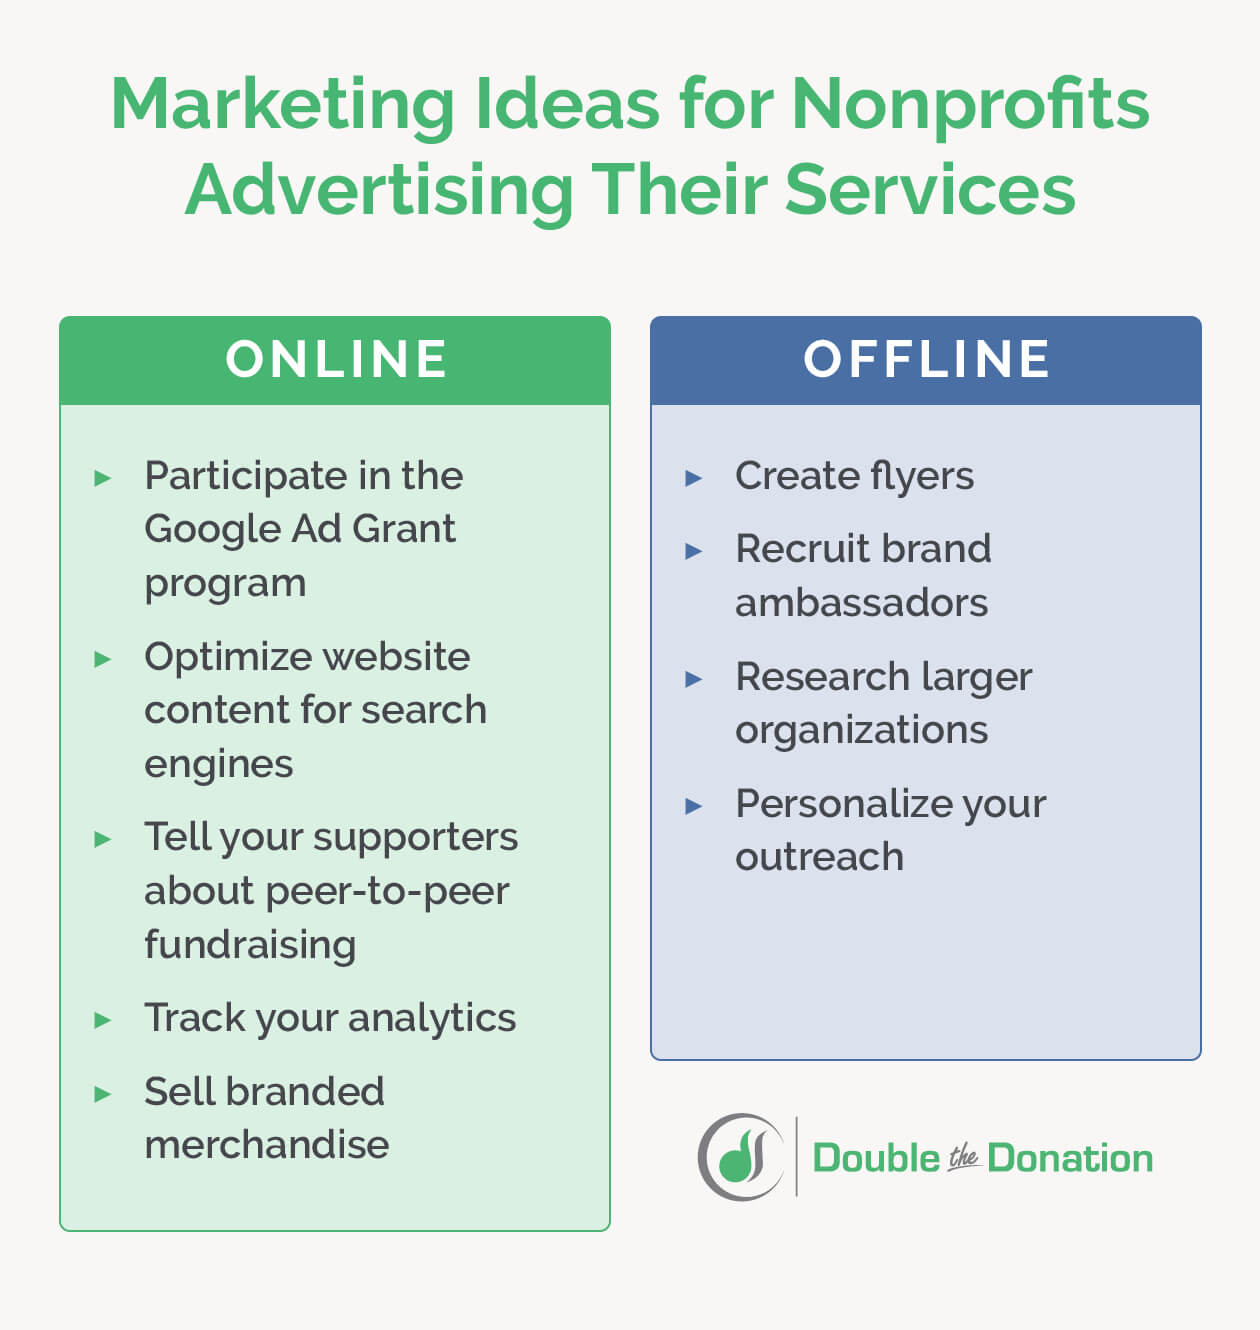 There are so many nonprofit marketing ideas for advertising your organization’s services.